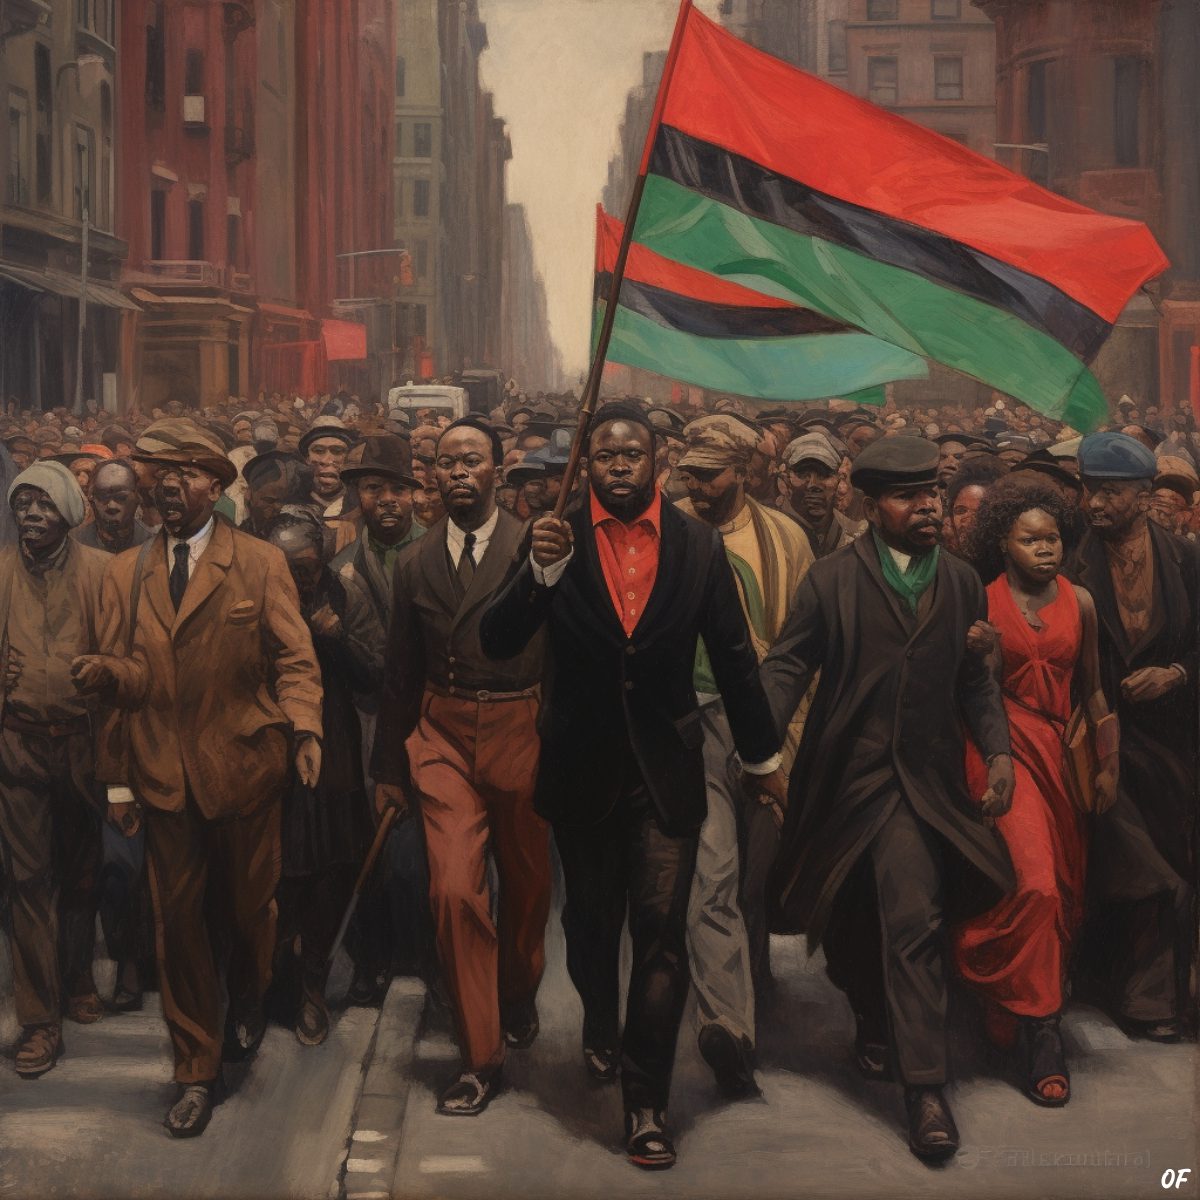 A black rights activist march in 1920s New York led by Marcus Garvey holding a Pan African Flag.